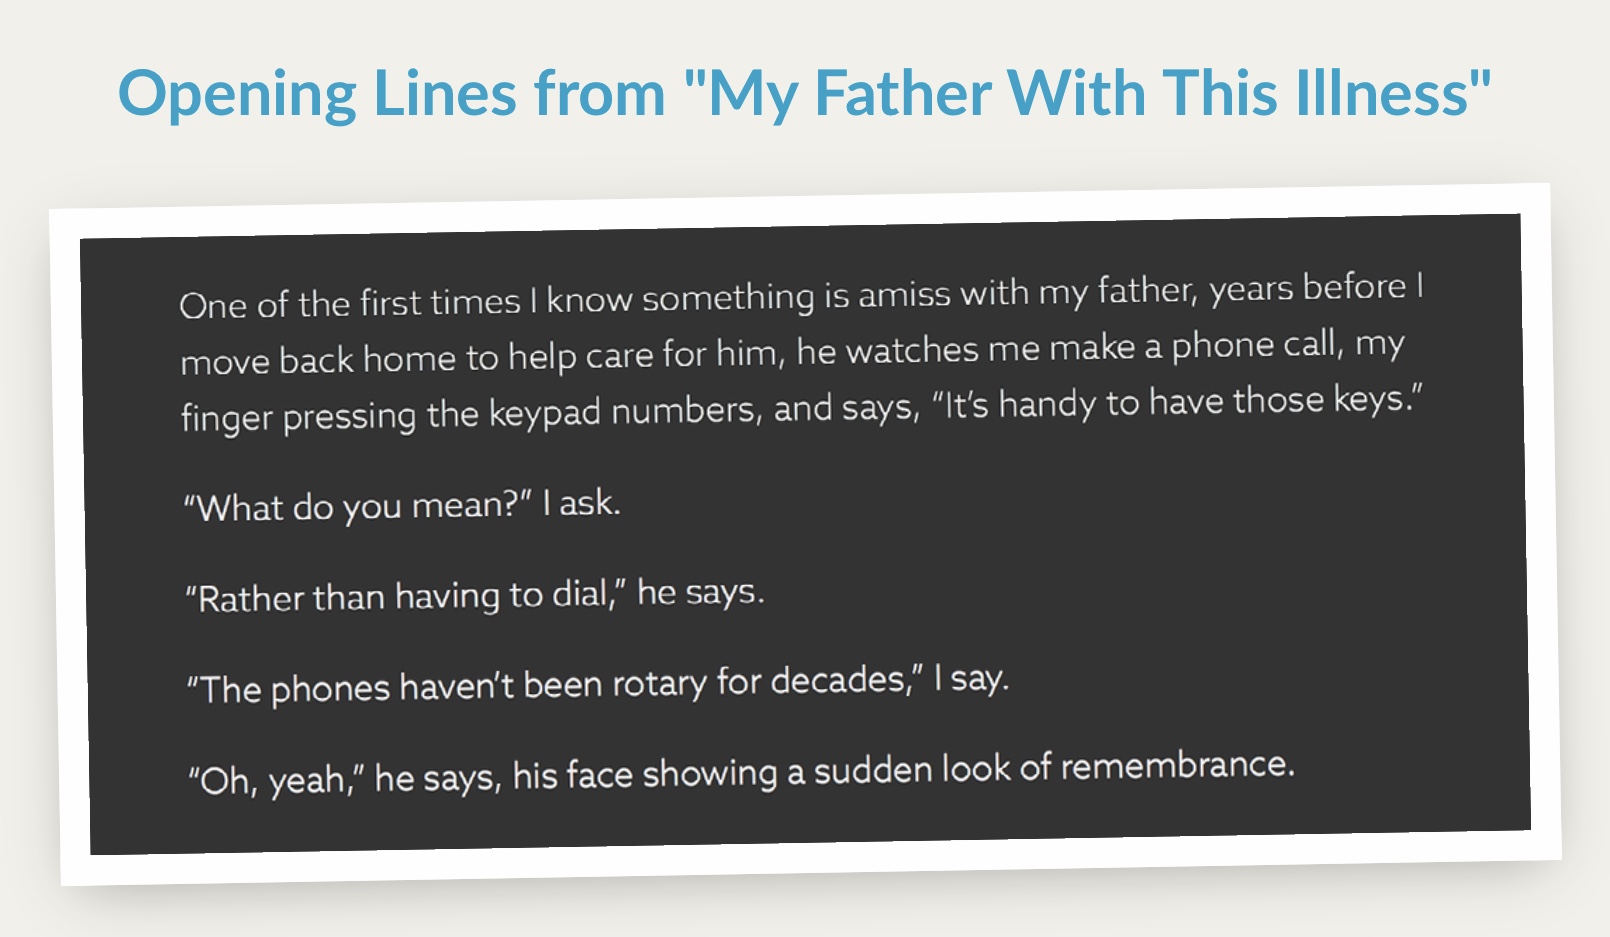  An image of the opening lines to "My Father With This Illness" by Pamela Woolford